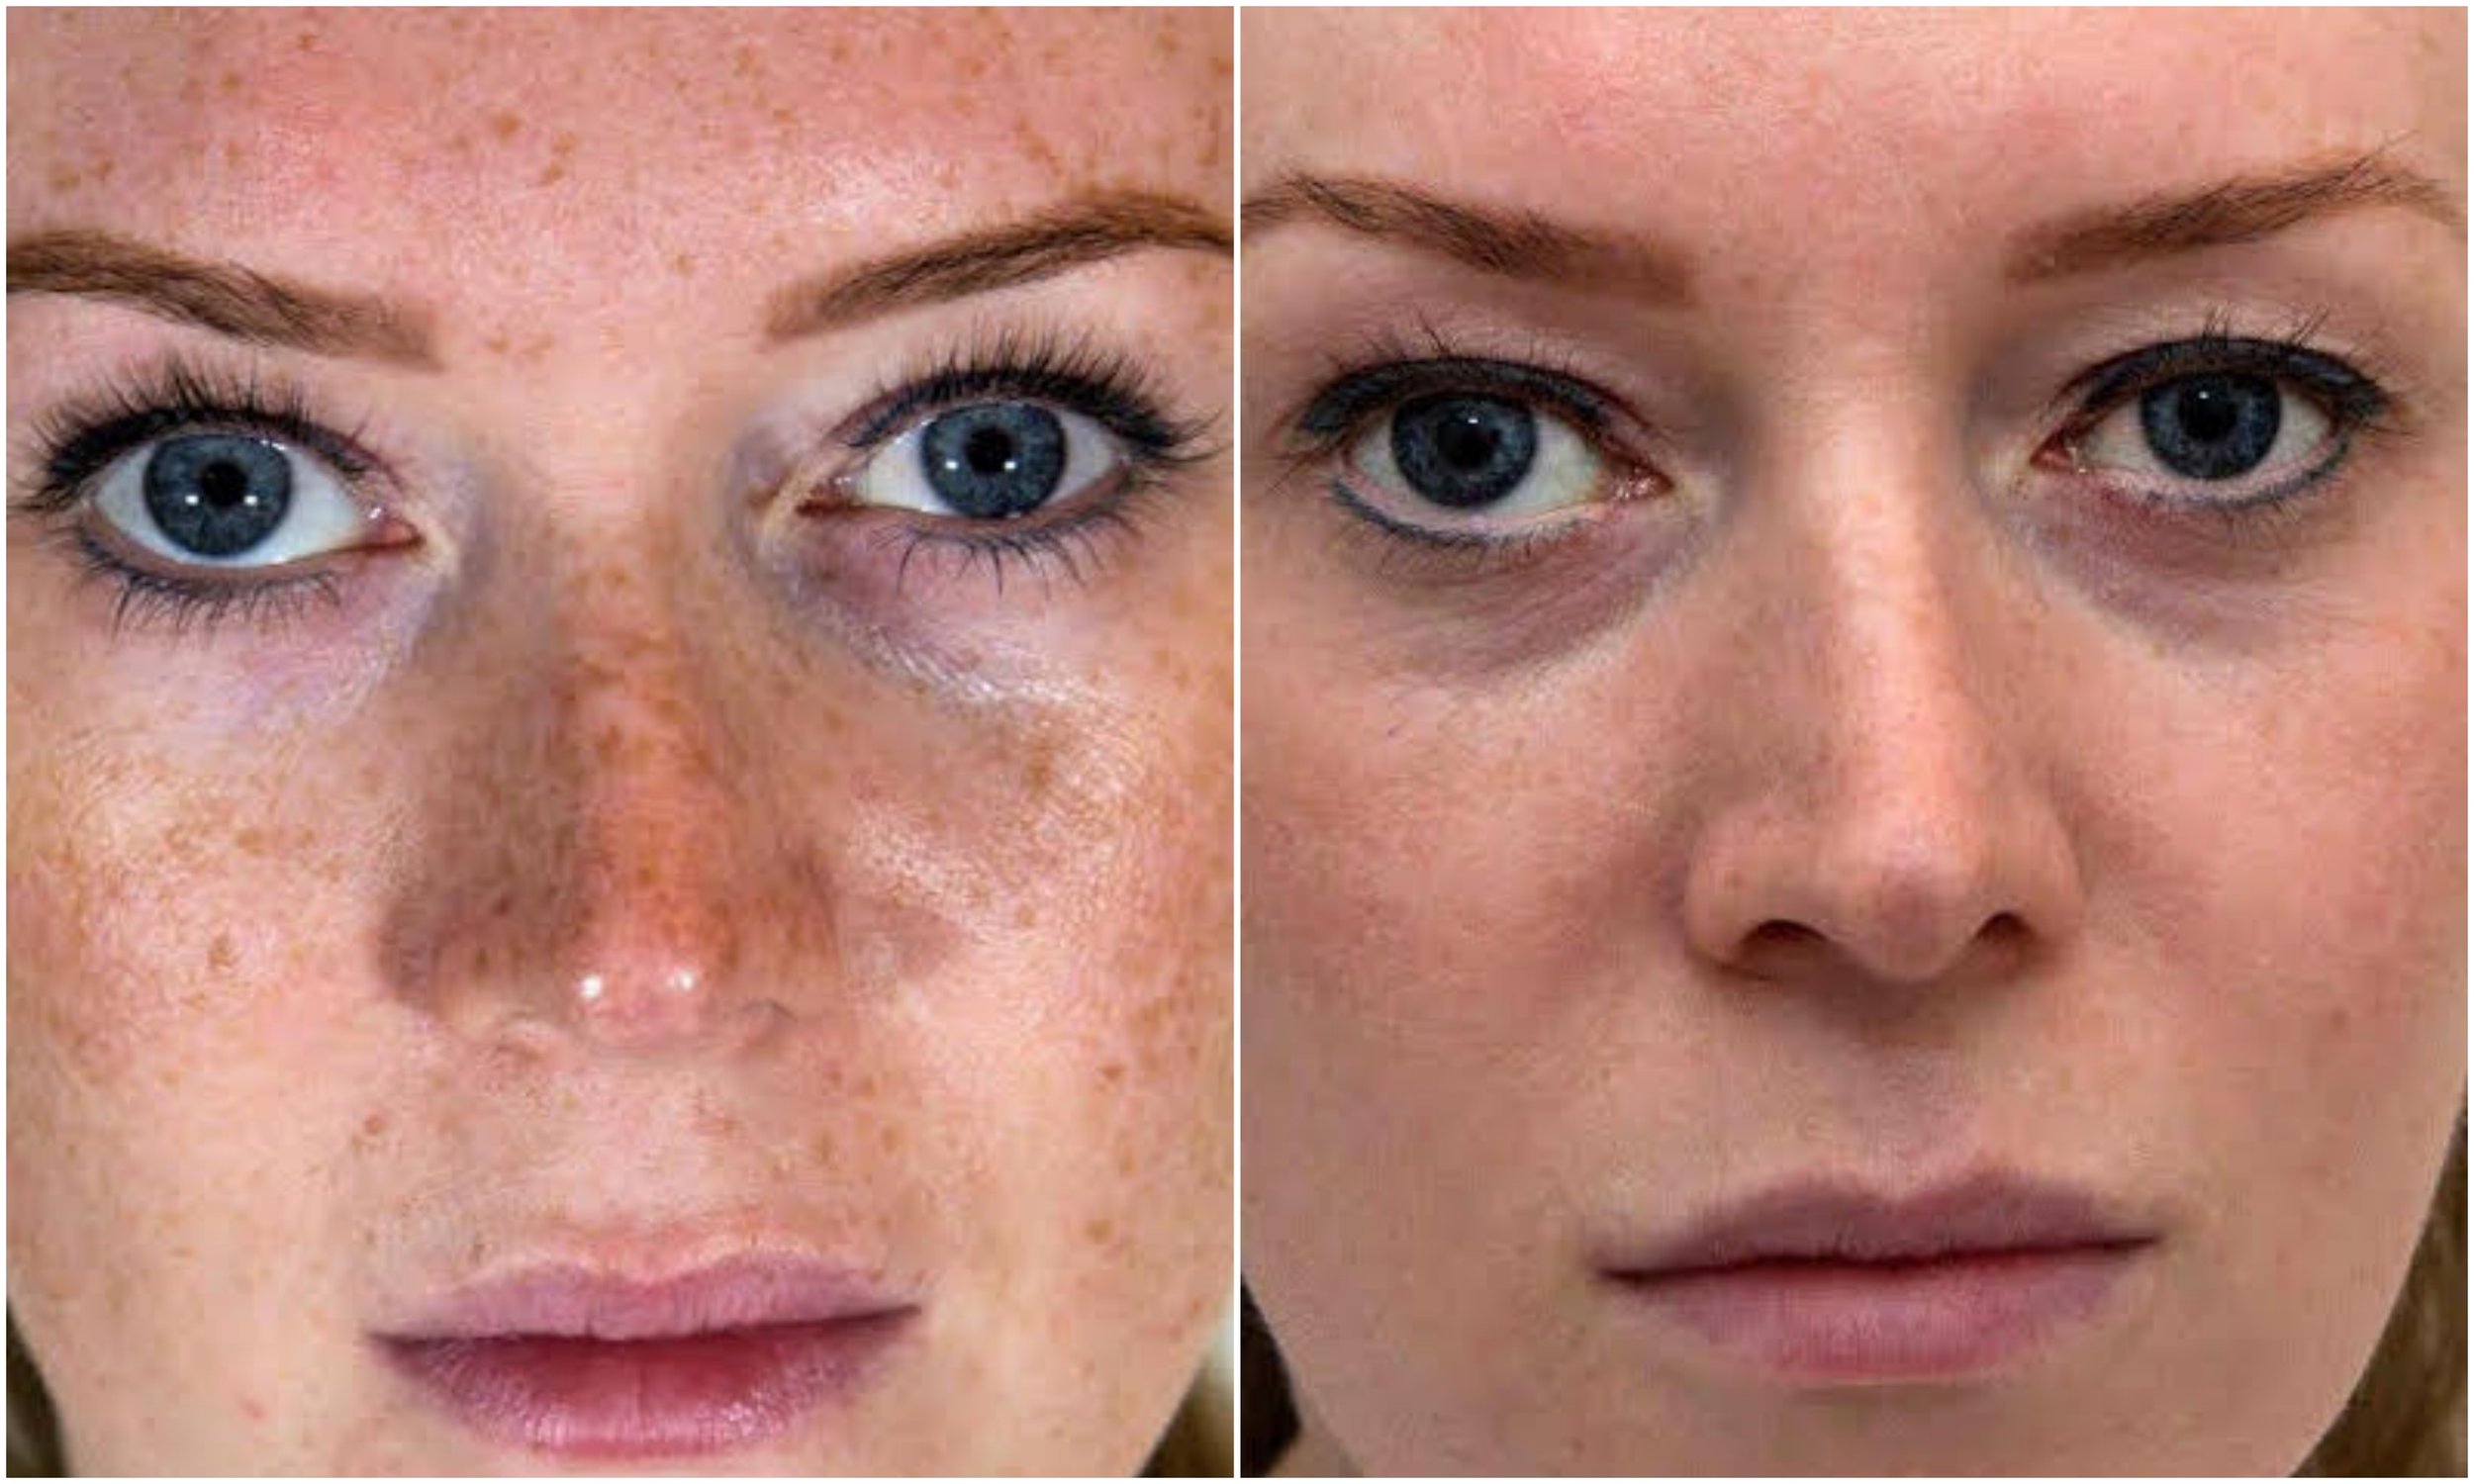   Freckles removed, even skin tone achieved using Perfect Derma Peel (Intense Peel)  